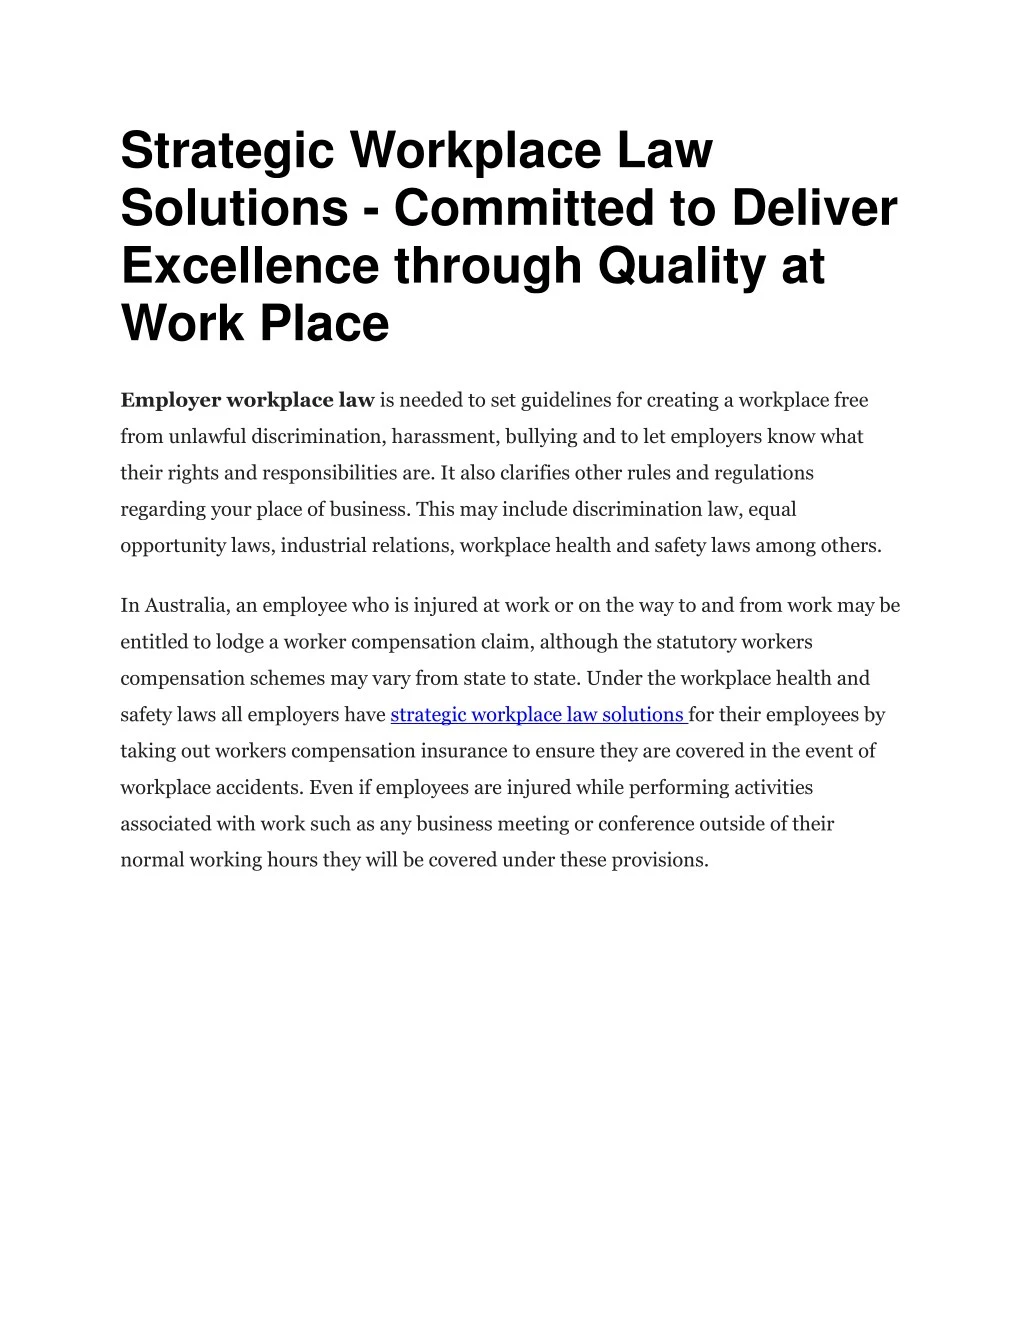 strategic workplace law solutions committed